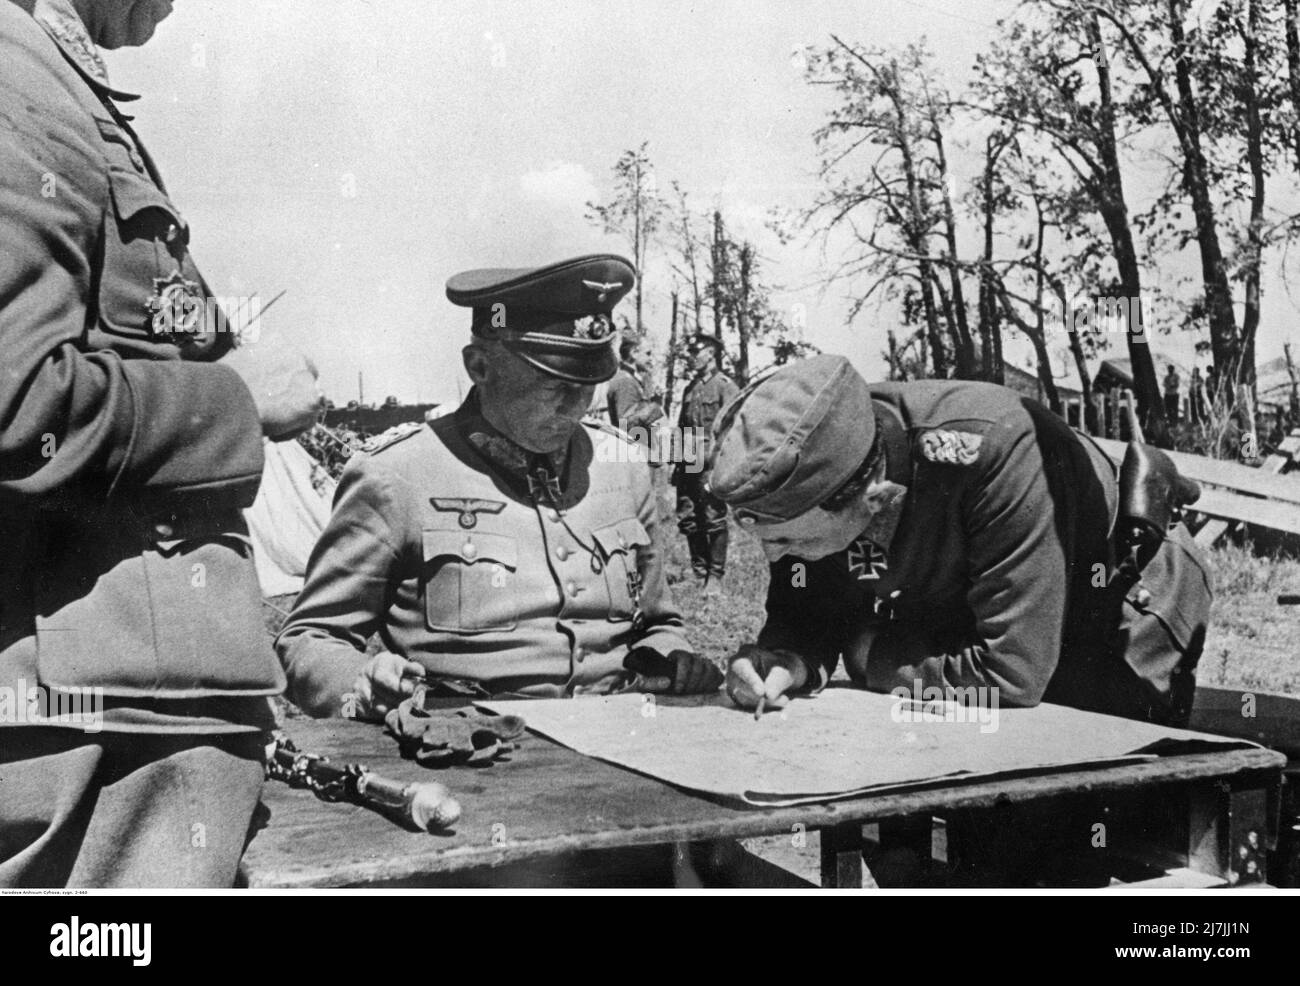 Günther Adolf Ferdinand von Kluge, a German field marshal during World War II who held commands on both the Eastern and Western Fronts, meeting with generals during Operation Barbarossa. He commanded the 4th Army of the Wehrmacht during the invasion of Poland in 1939 and the Battle of France in 1940, earning a promotion to Generalfeldmarschall. Kluge went on to command the 4th Army in Operation Barbarossa (the invasion of the Soviet Union) and the Battle for Moscow in 1941. Stock Photo